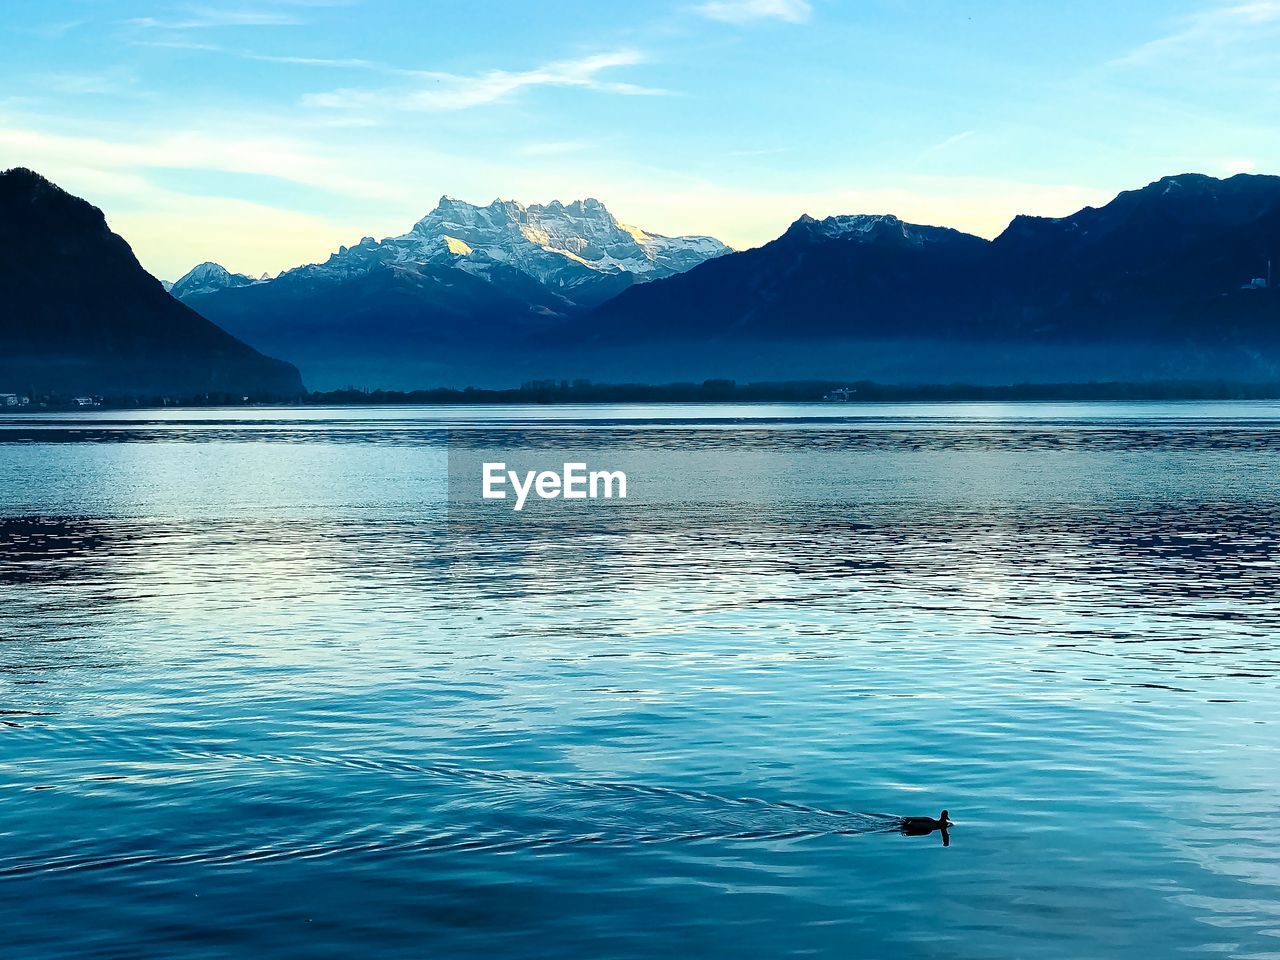 Scenic view of lake and mountains against sky with a duck